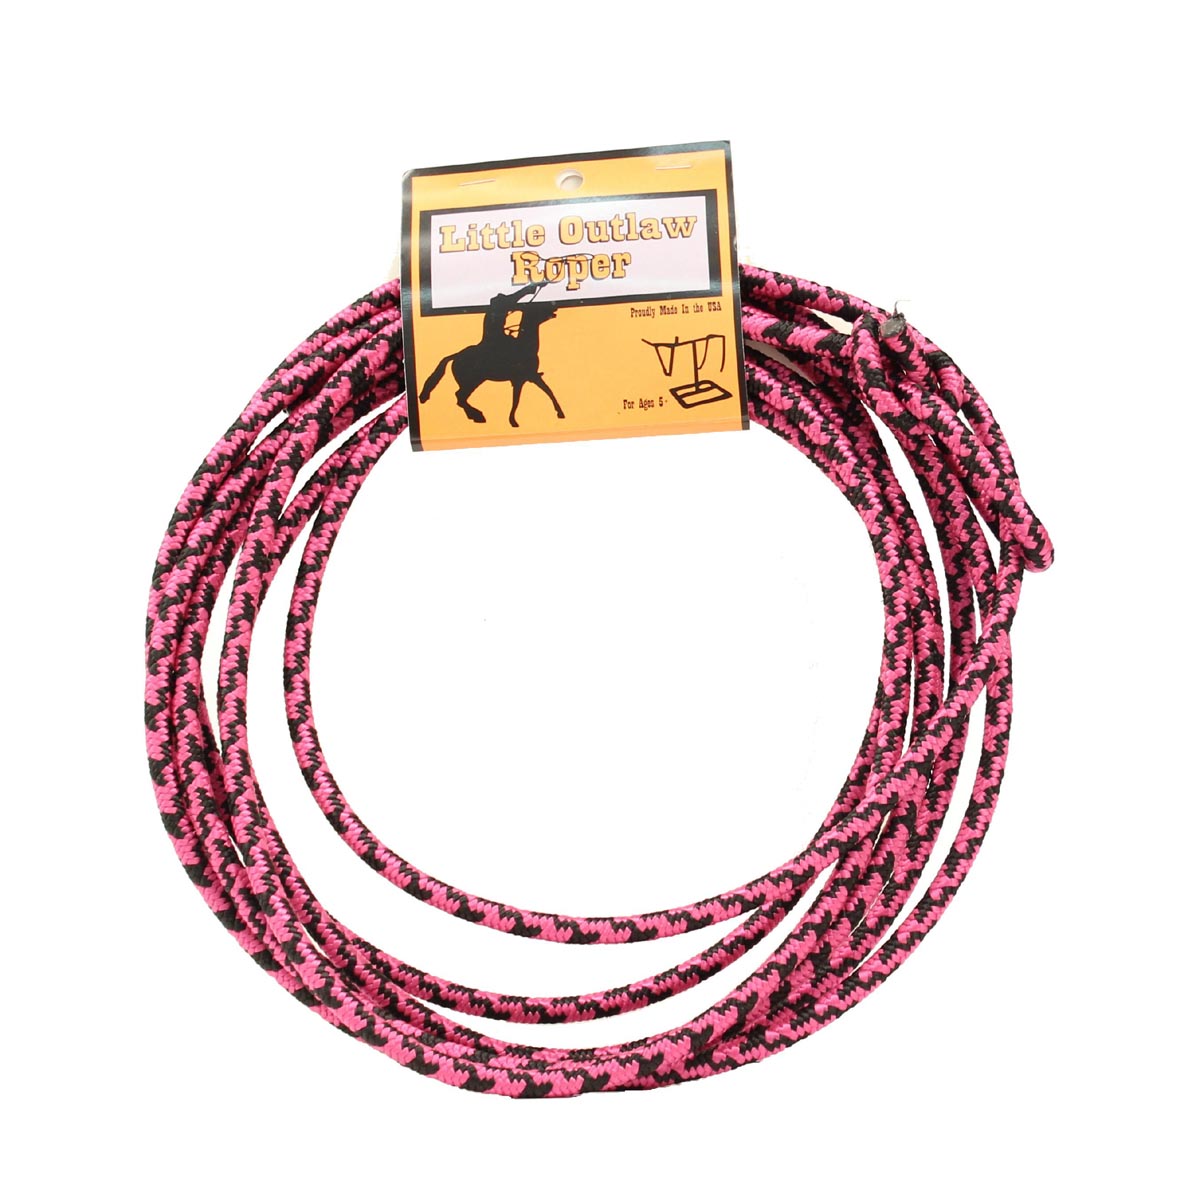 5010329 Youth Rope, Pink & Black